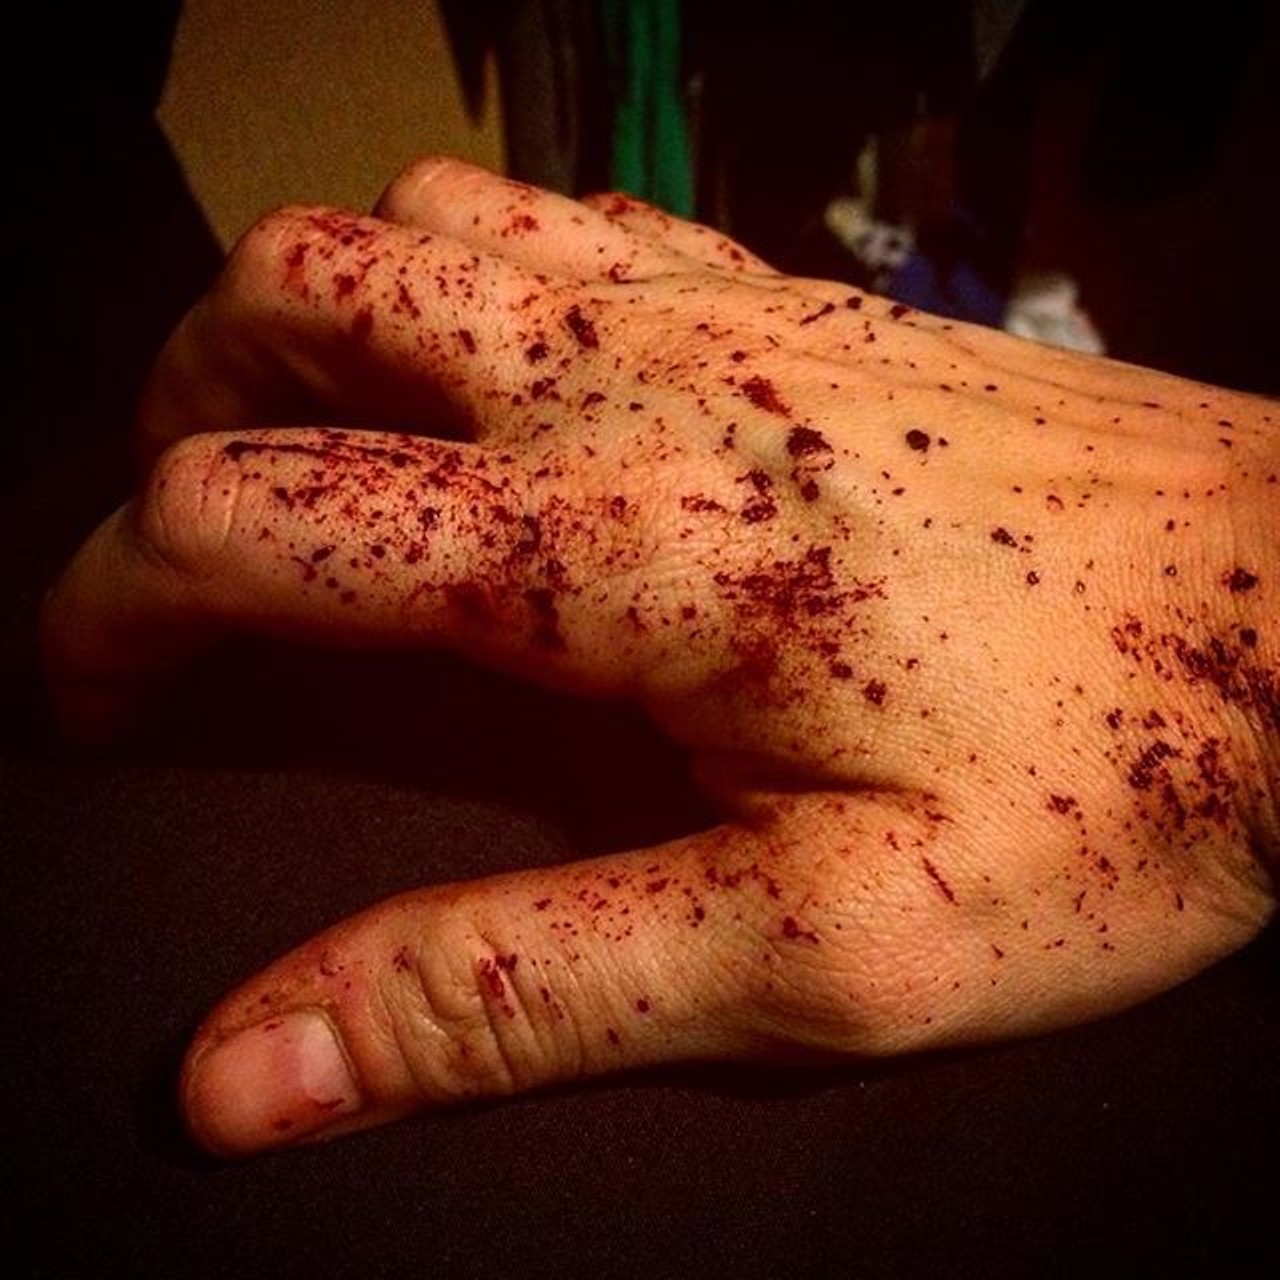 You just have to live with the fact that fake blood doesn't always wash off. 
Photo via stephpressman on Instagram